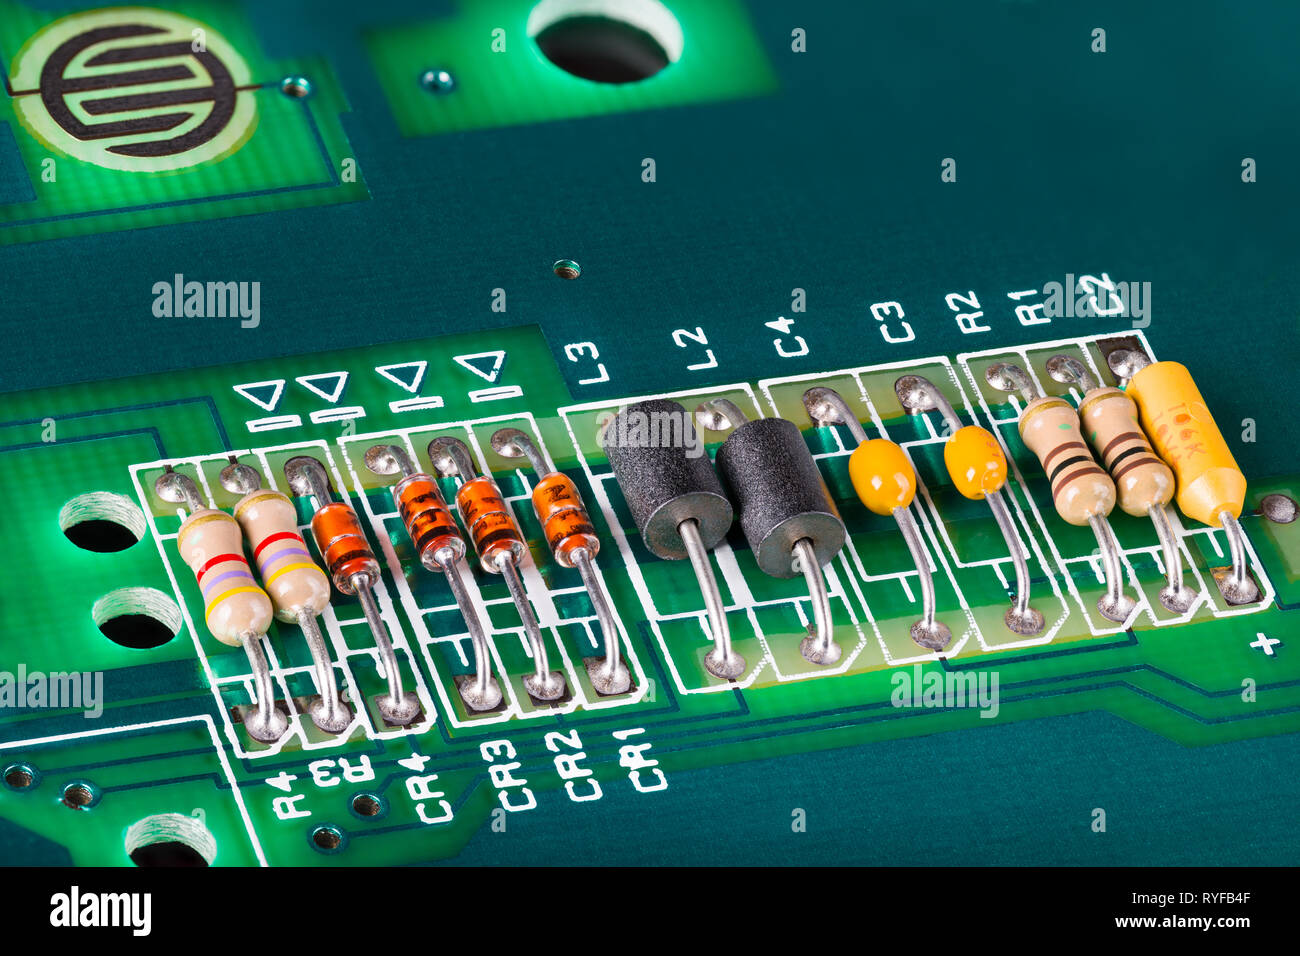 Inductors, capacitors, resistors and diodes on PCB. Colorful electronic components detail. Green circuit board. Button switch. Open computer keyboard. Stock Photo